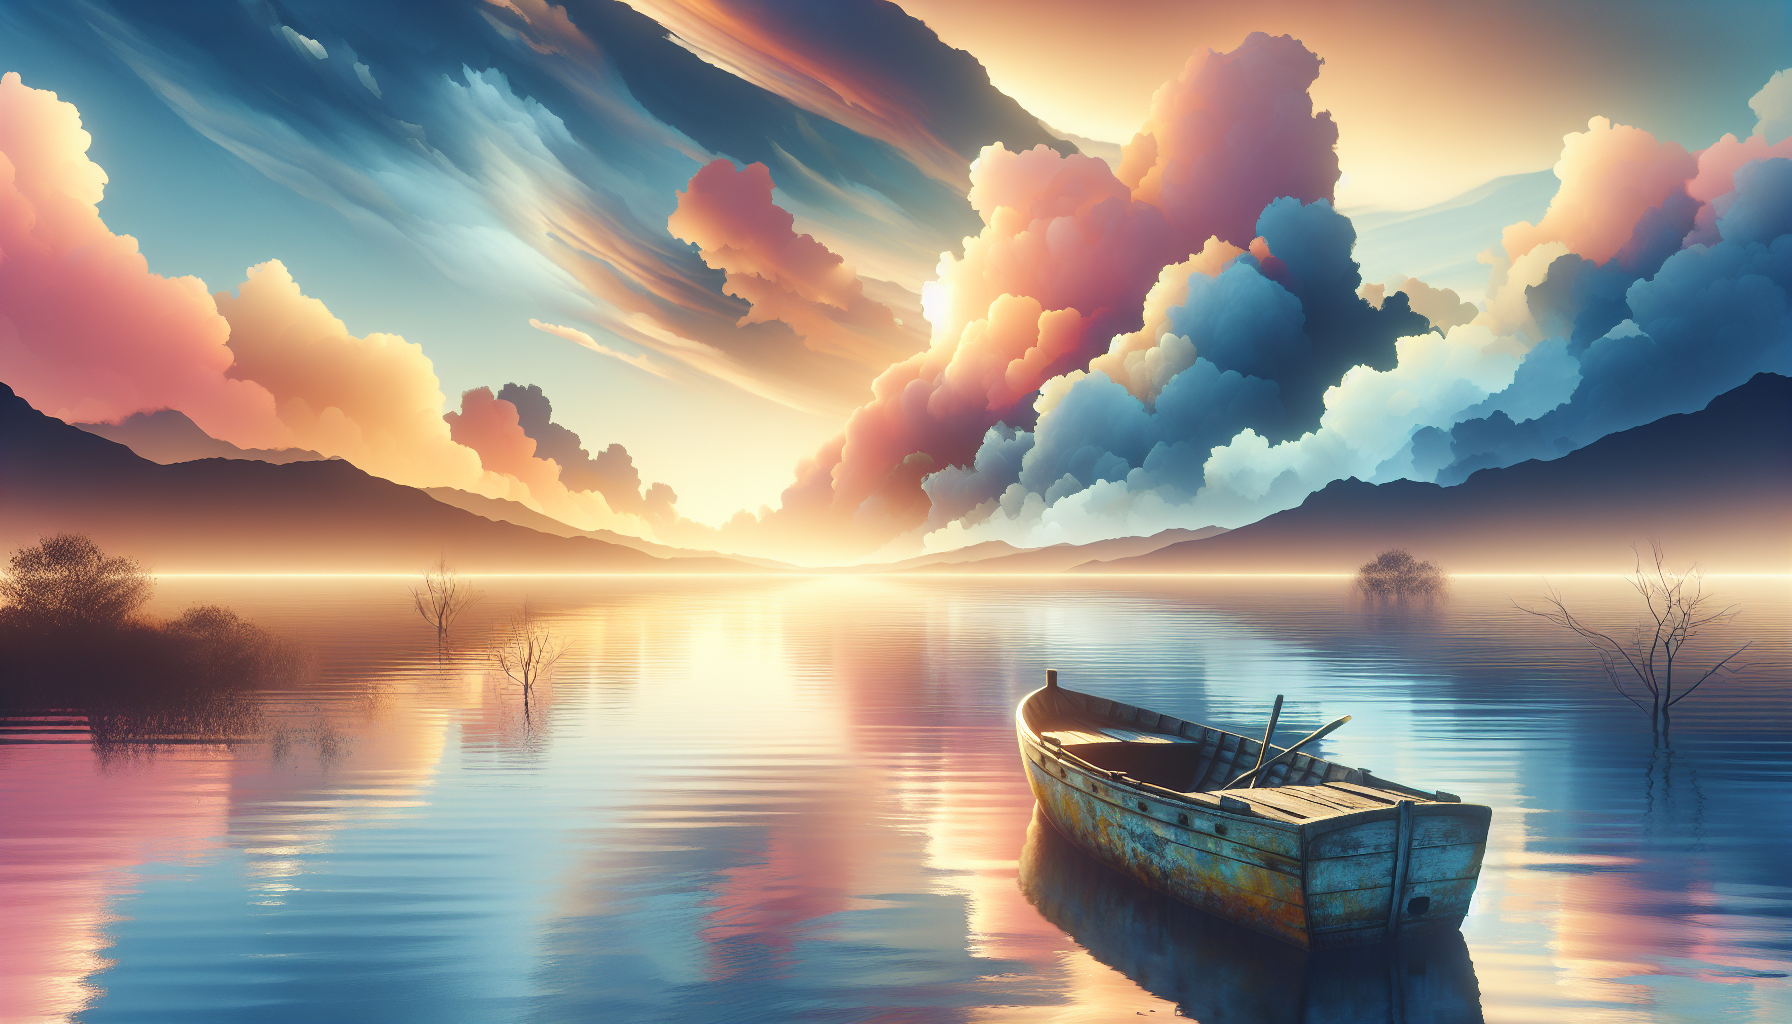 Serene landscape showing a weathered old boat calmly floating on a peaceful sea at sunset, with soft light filtering through fluffy clouds, evoking a sense of tranquility and overcoming.